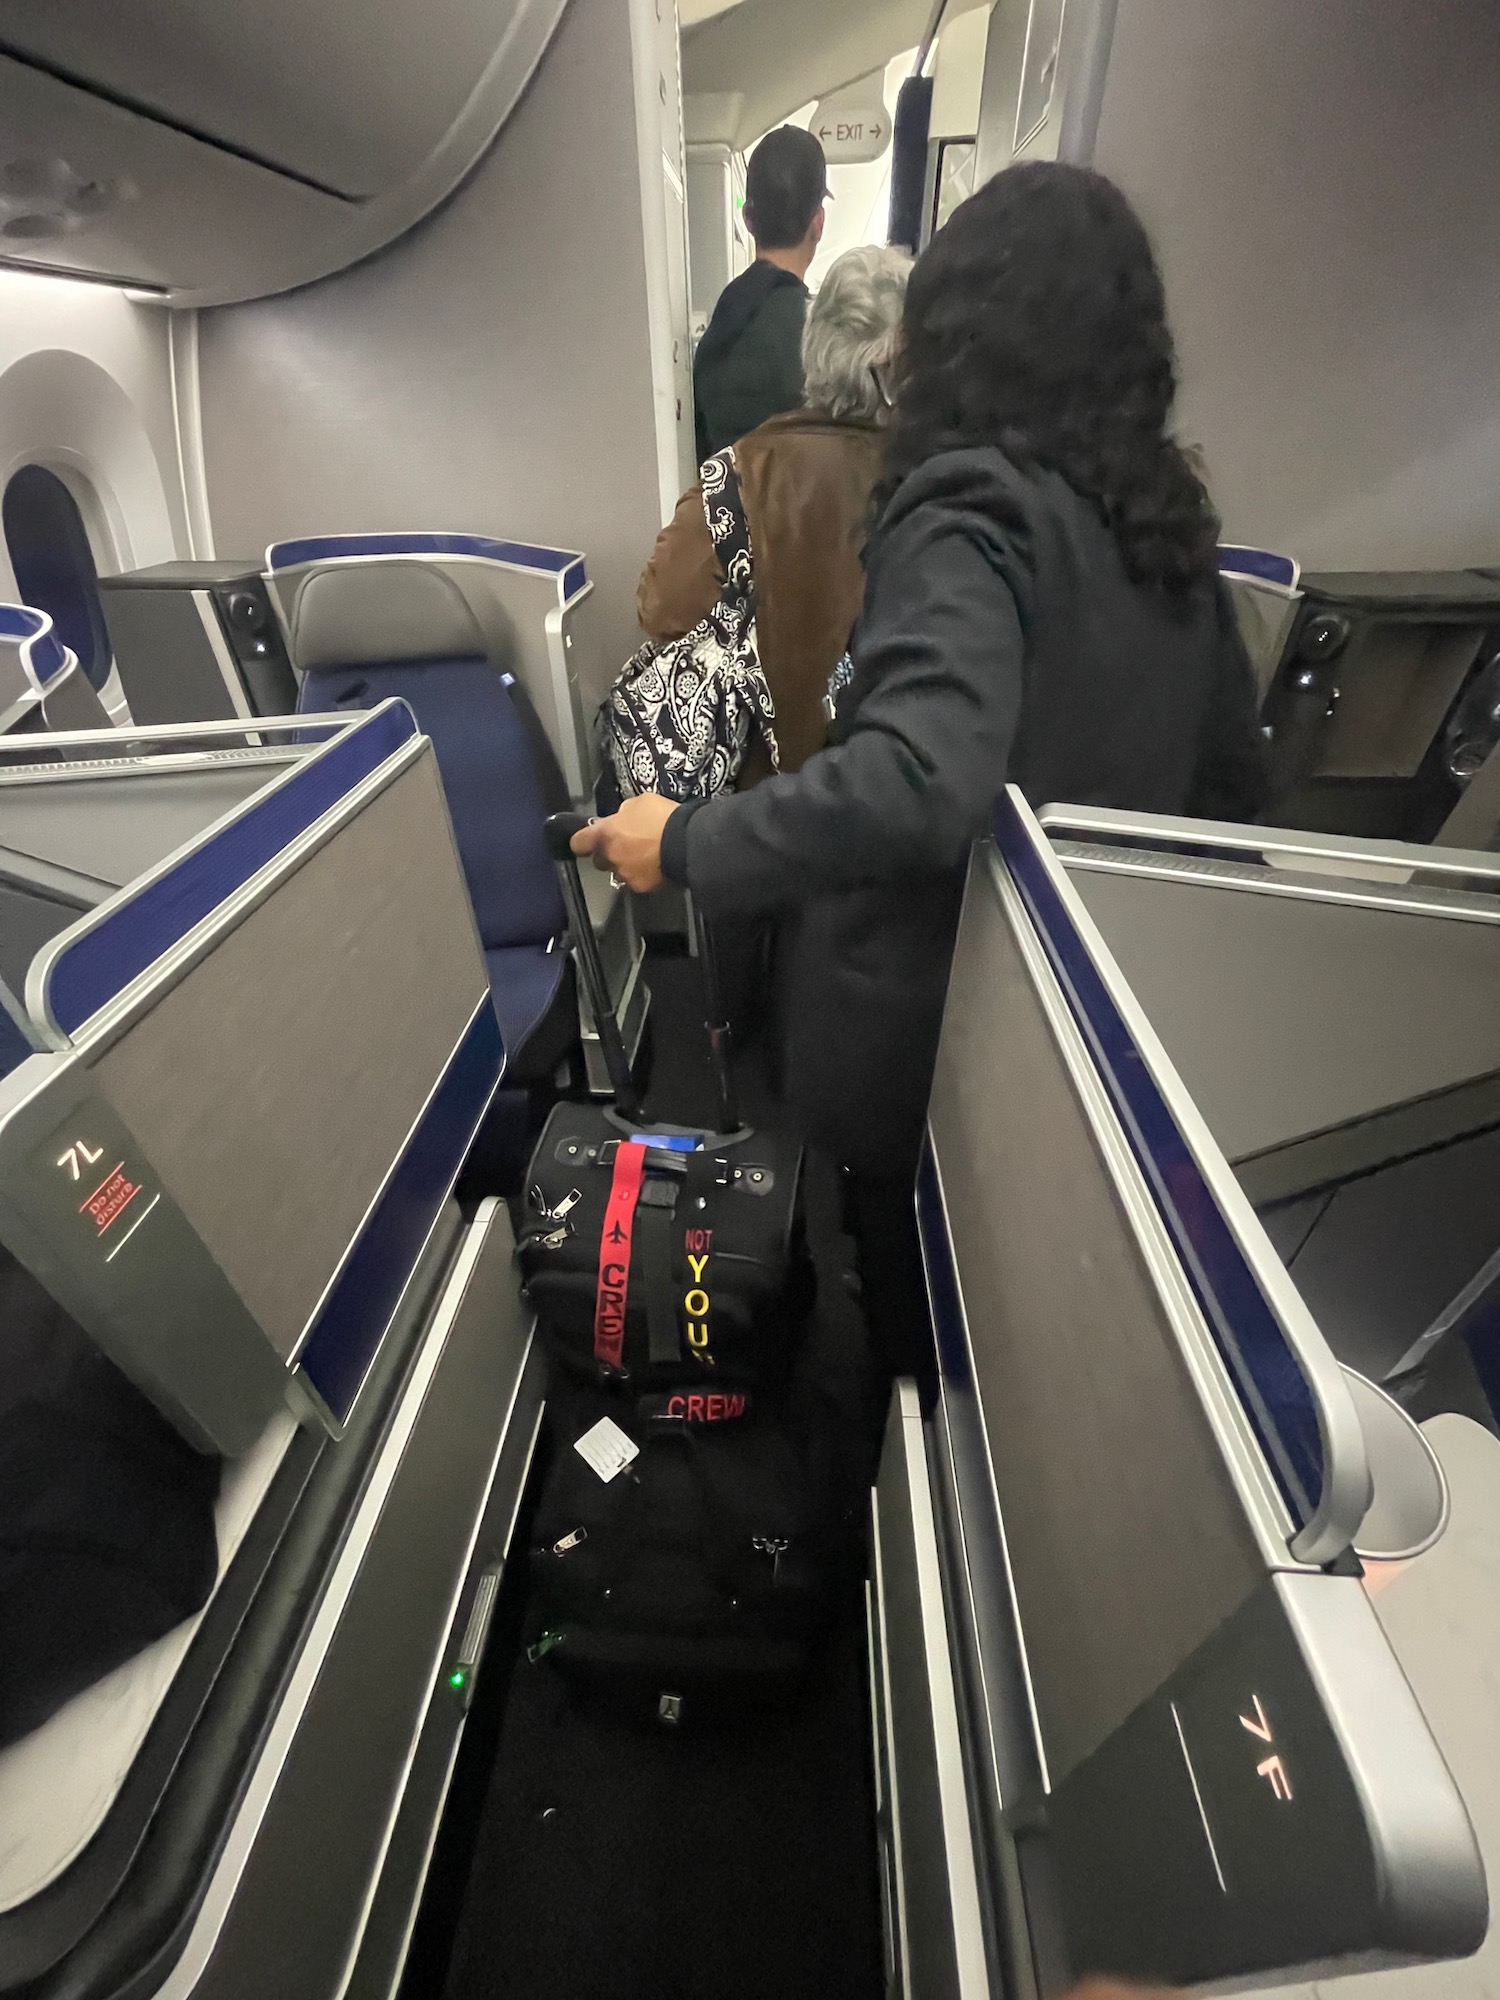 people on an airplane with luggage